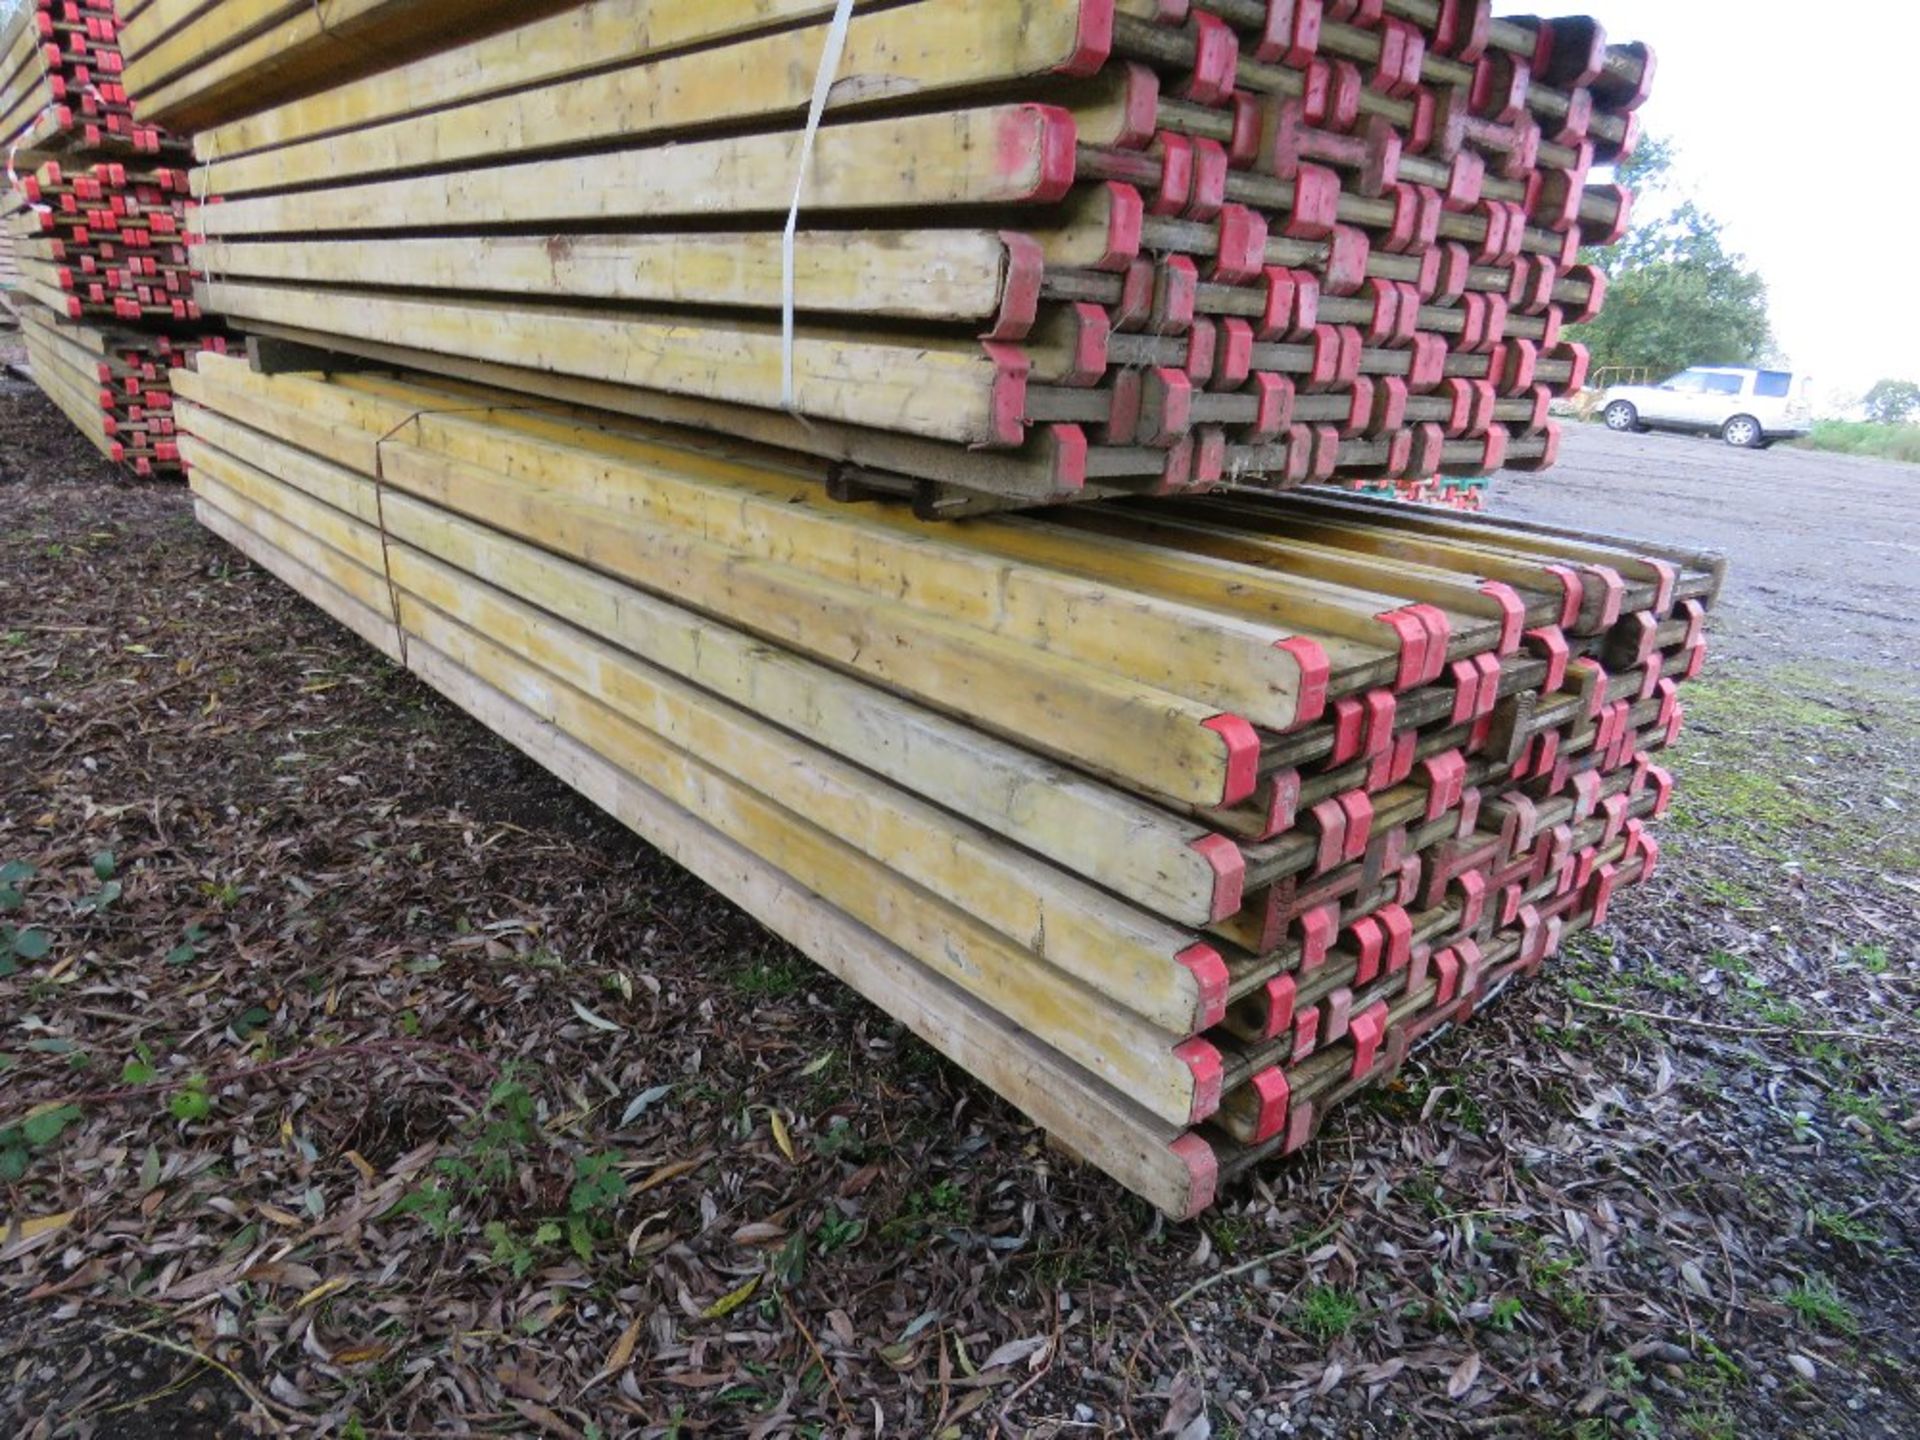 BUNDLE OF I BEAM WOODEN SHUTTERING BEAMS, 50NO APPROX IN THE BUNDLE, 4.5METRE LENGTH. ALSO SUITABLE - Image 4 of 4